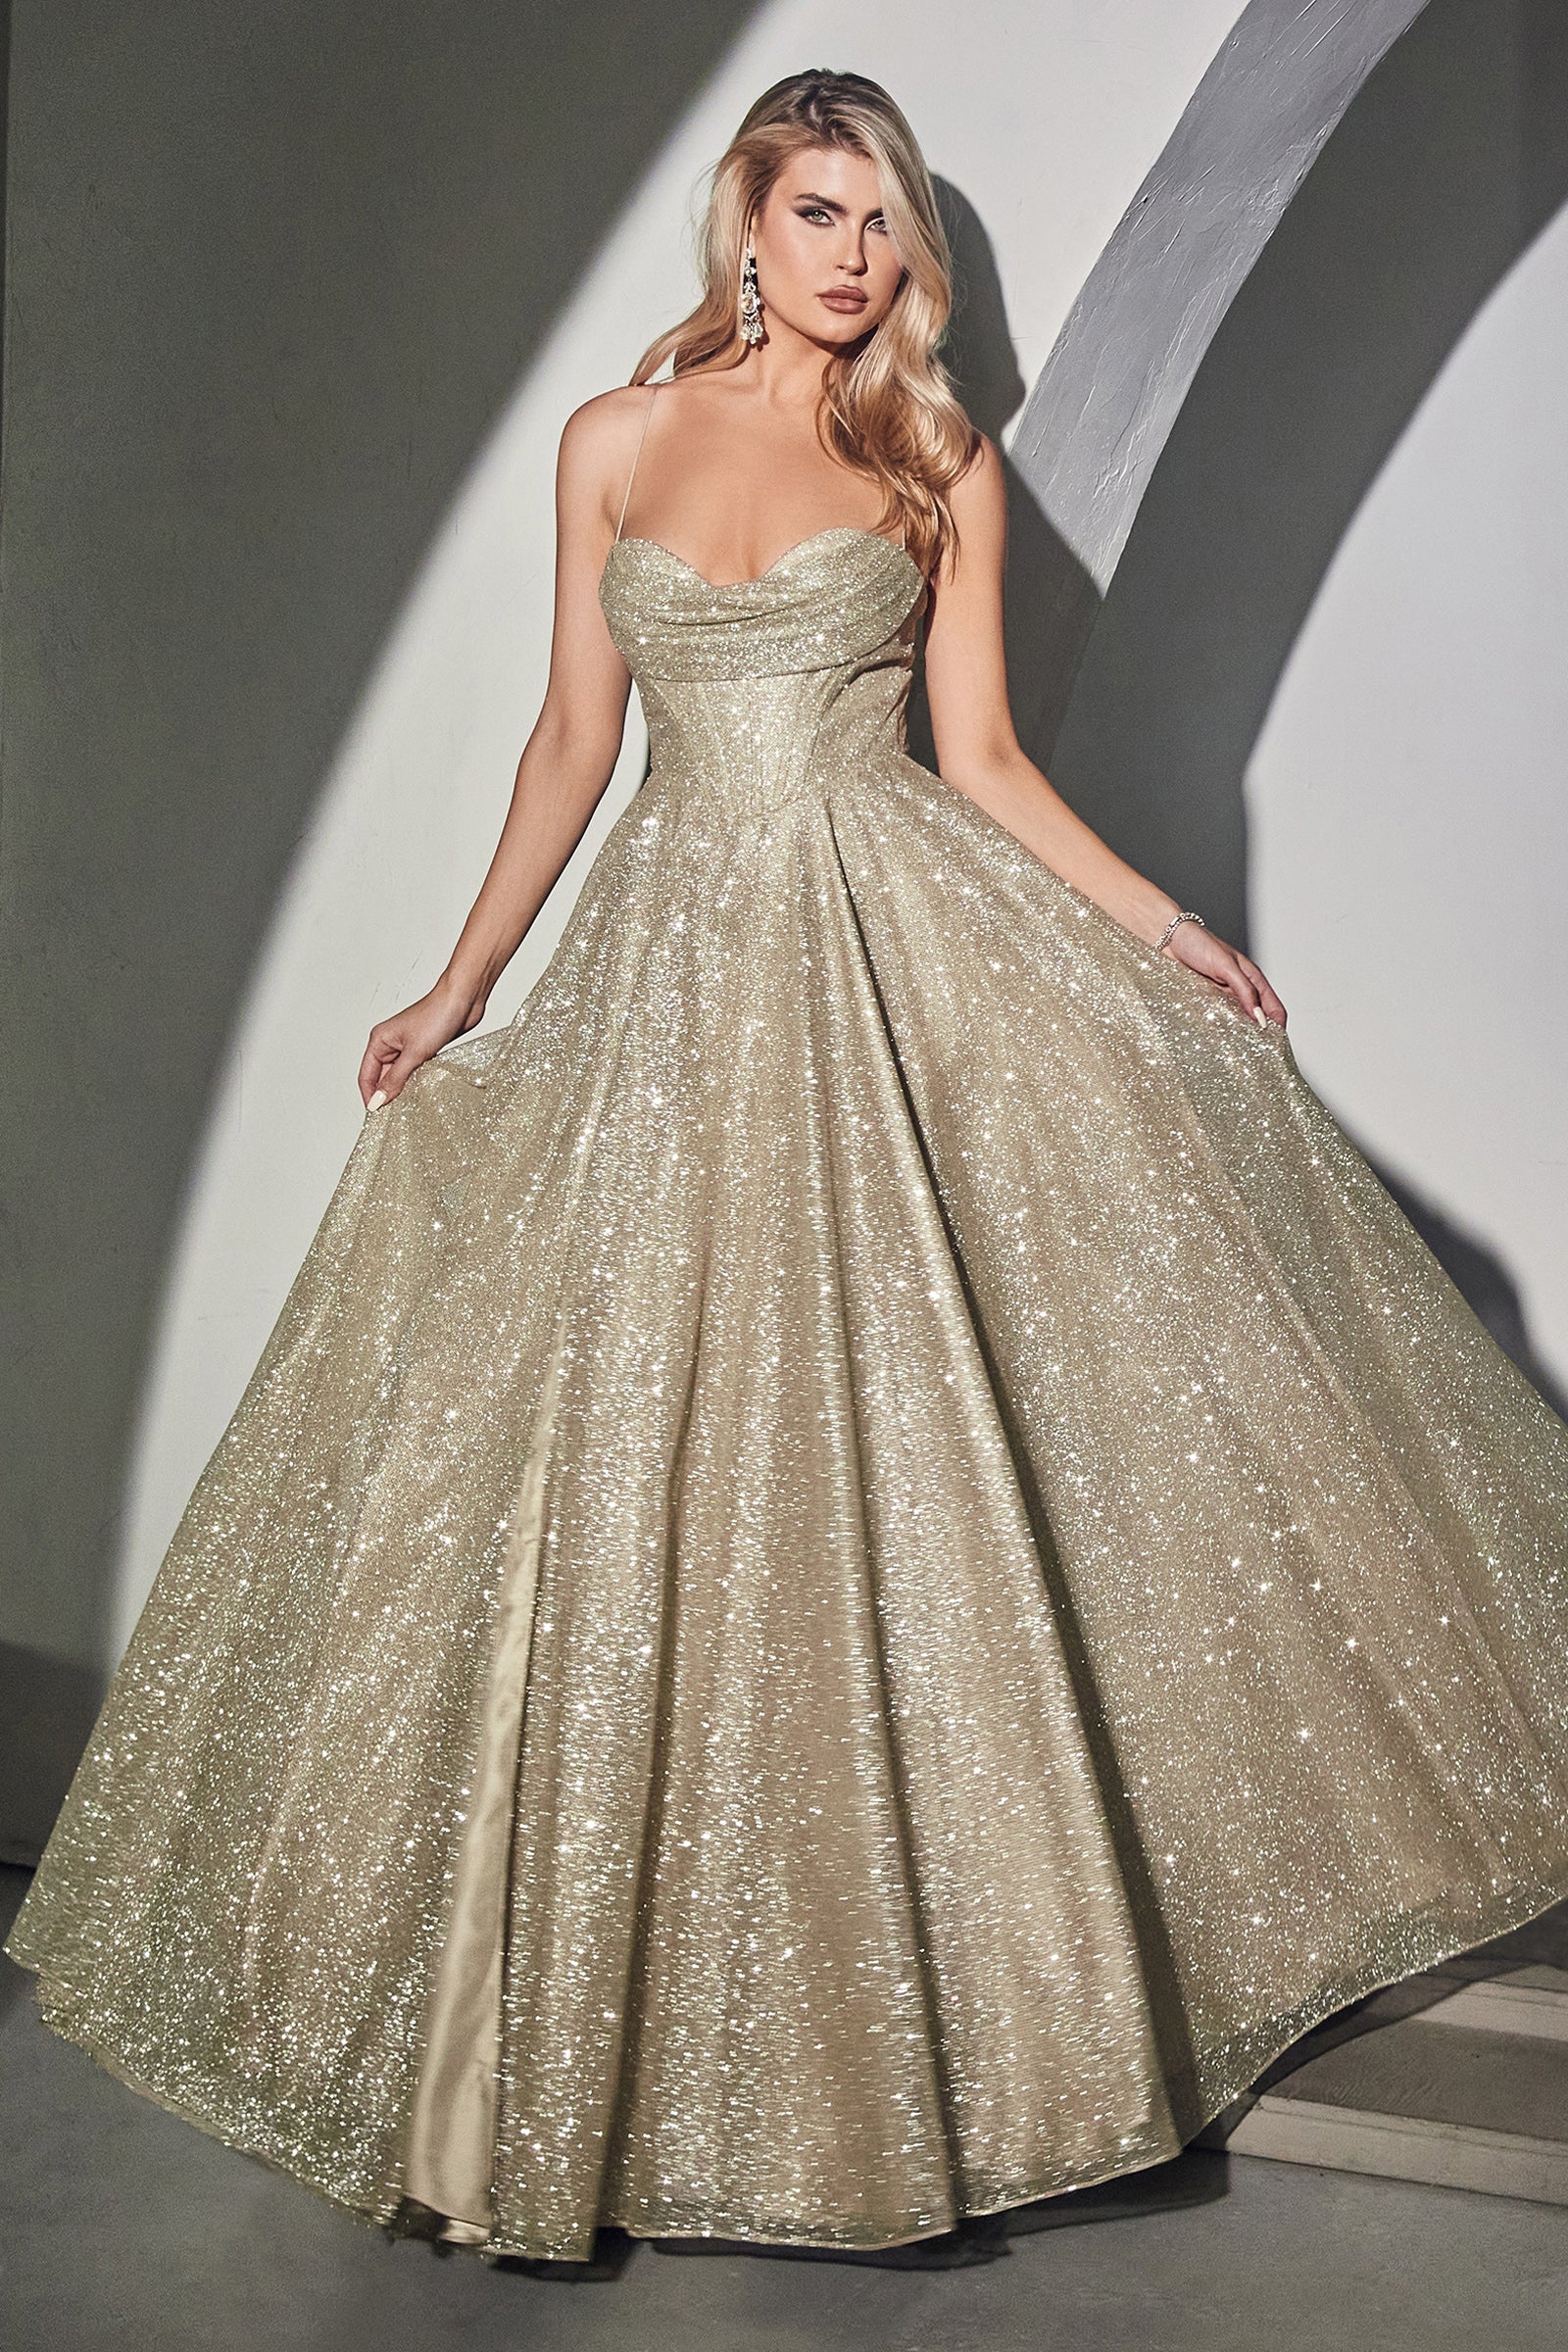 Debut Ball Gowns & Sweet 18 Birthday Dresses | Dresses for 18th Birthday